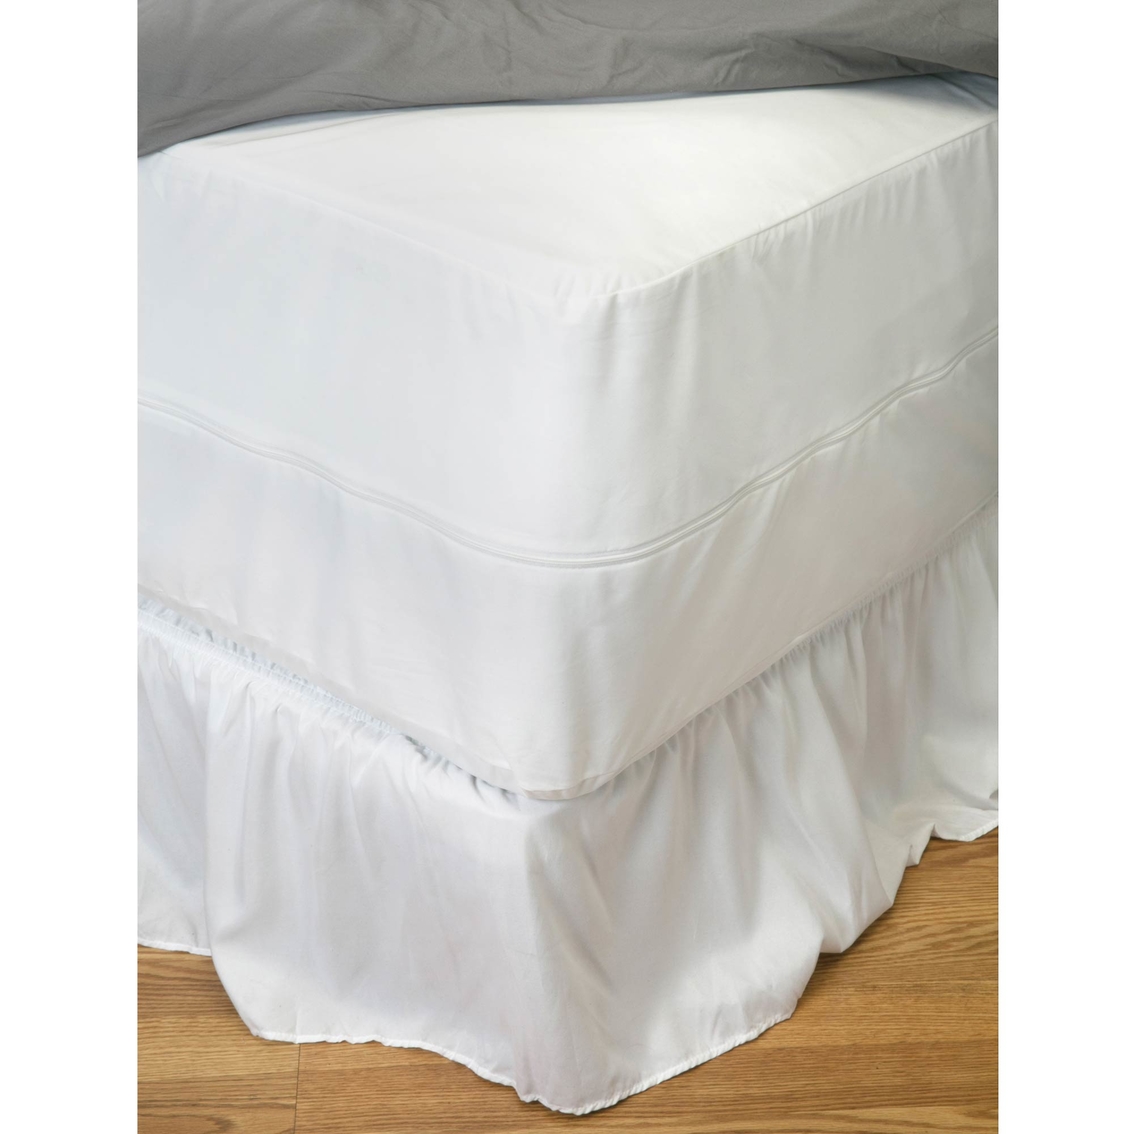 Kennedy's Home Collection Sanitized Waterproof Mattress Protector - Image 3 of 3